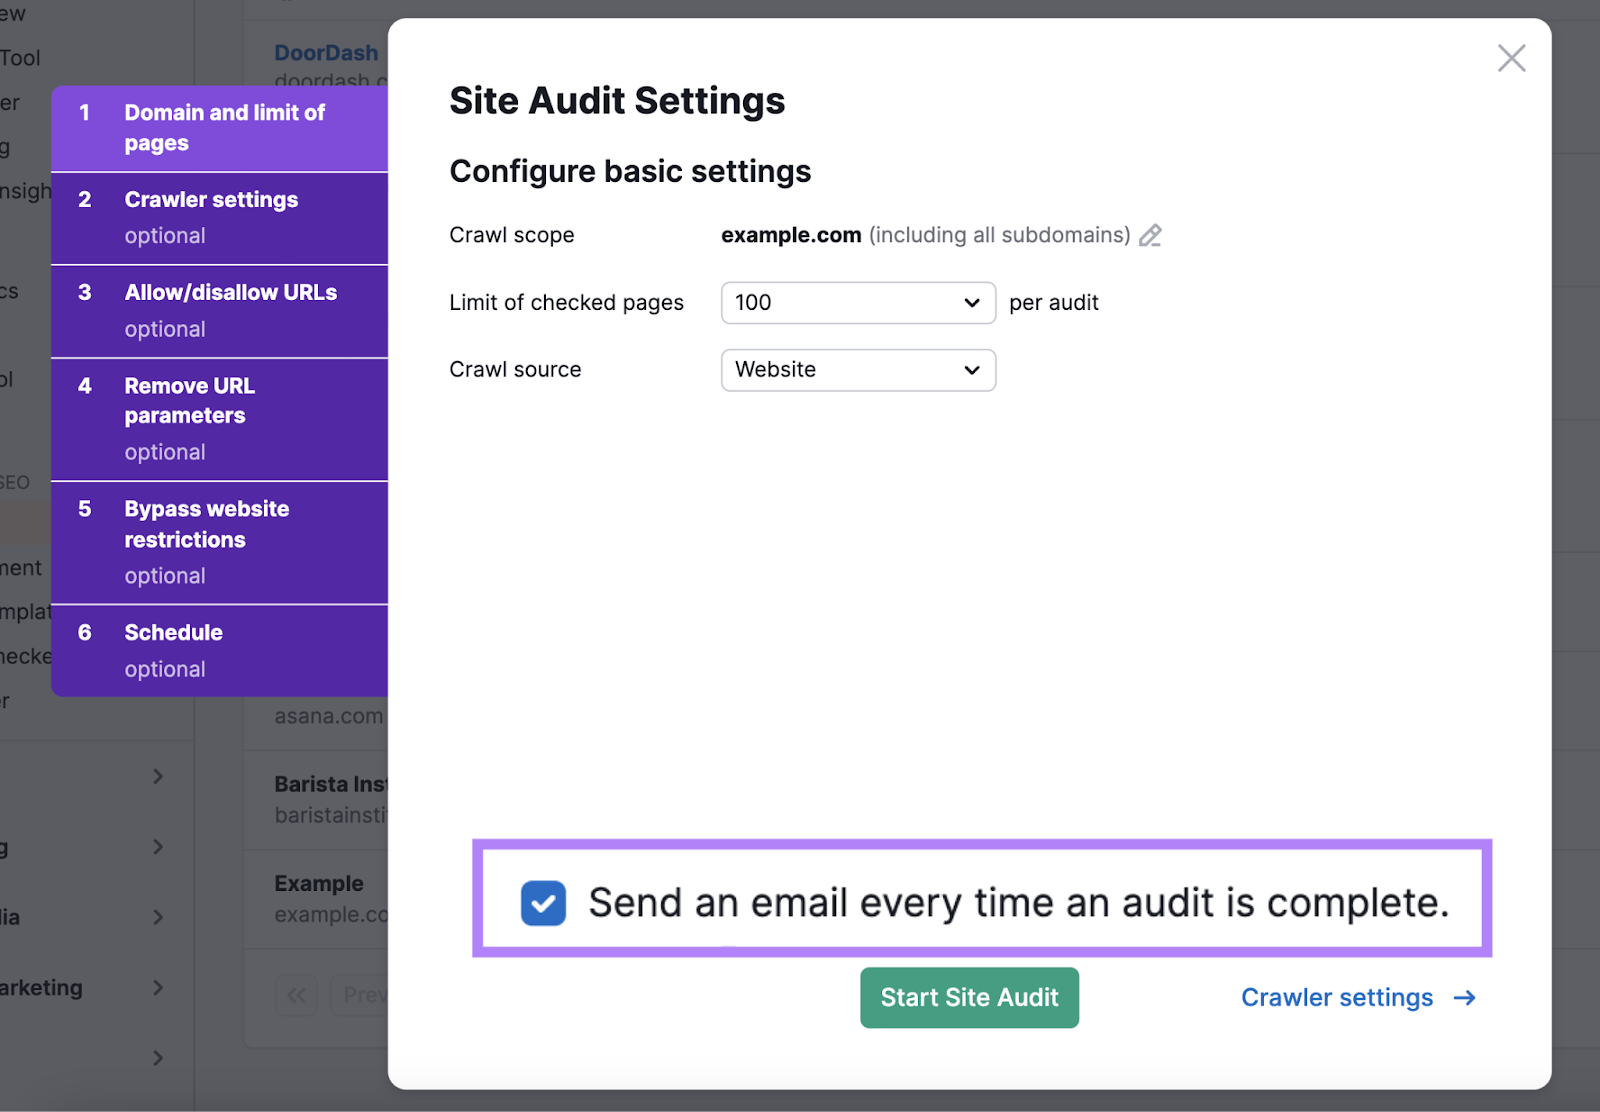 “Send an email every time an audit is complete” setting highlighted